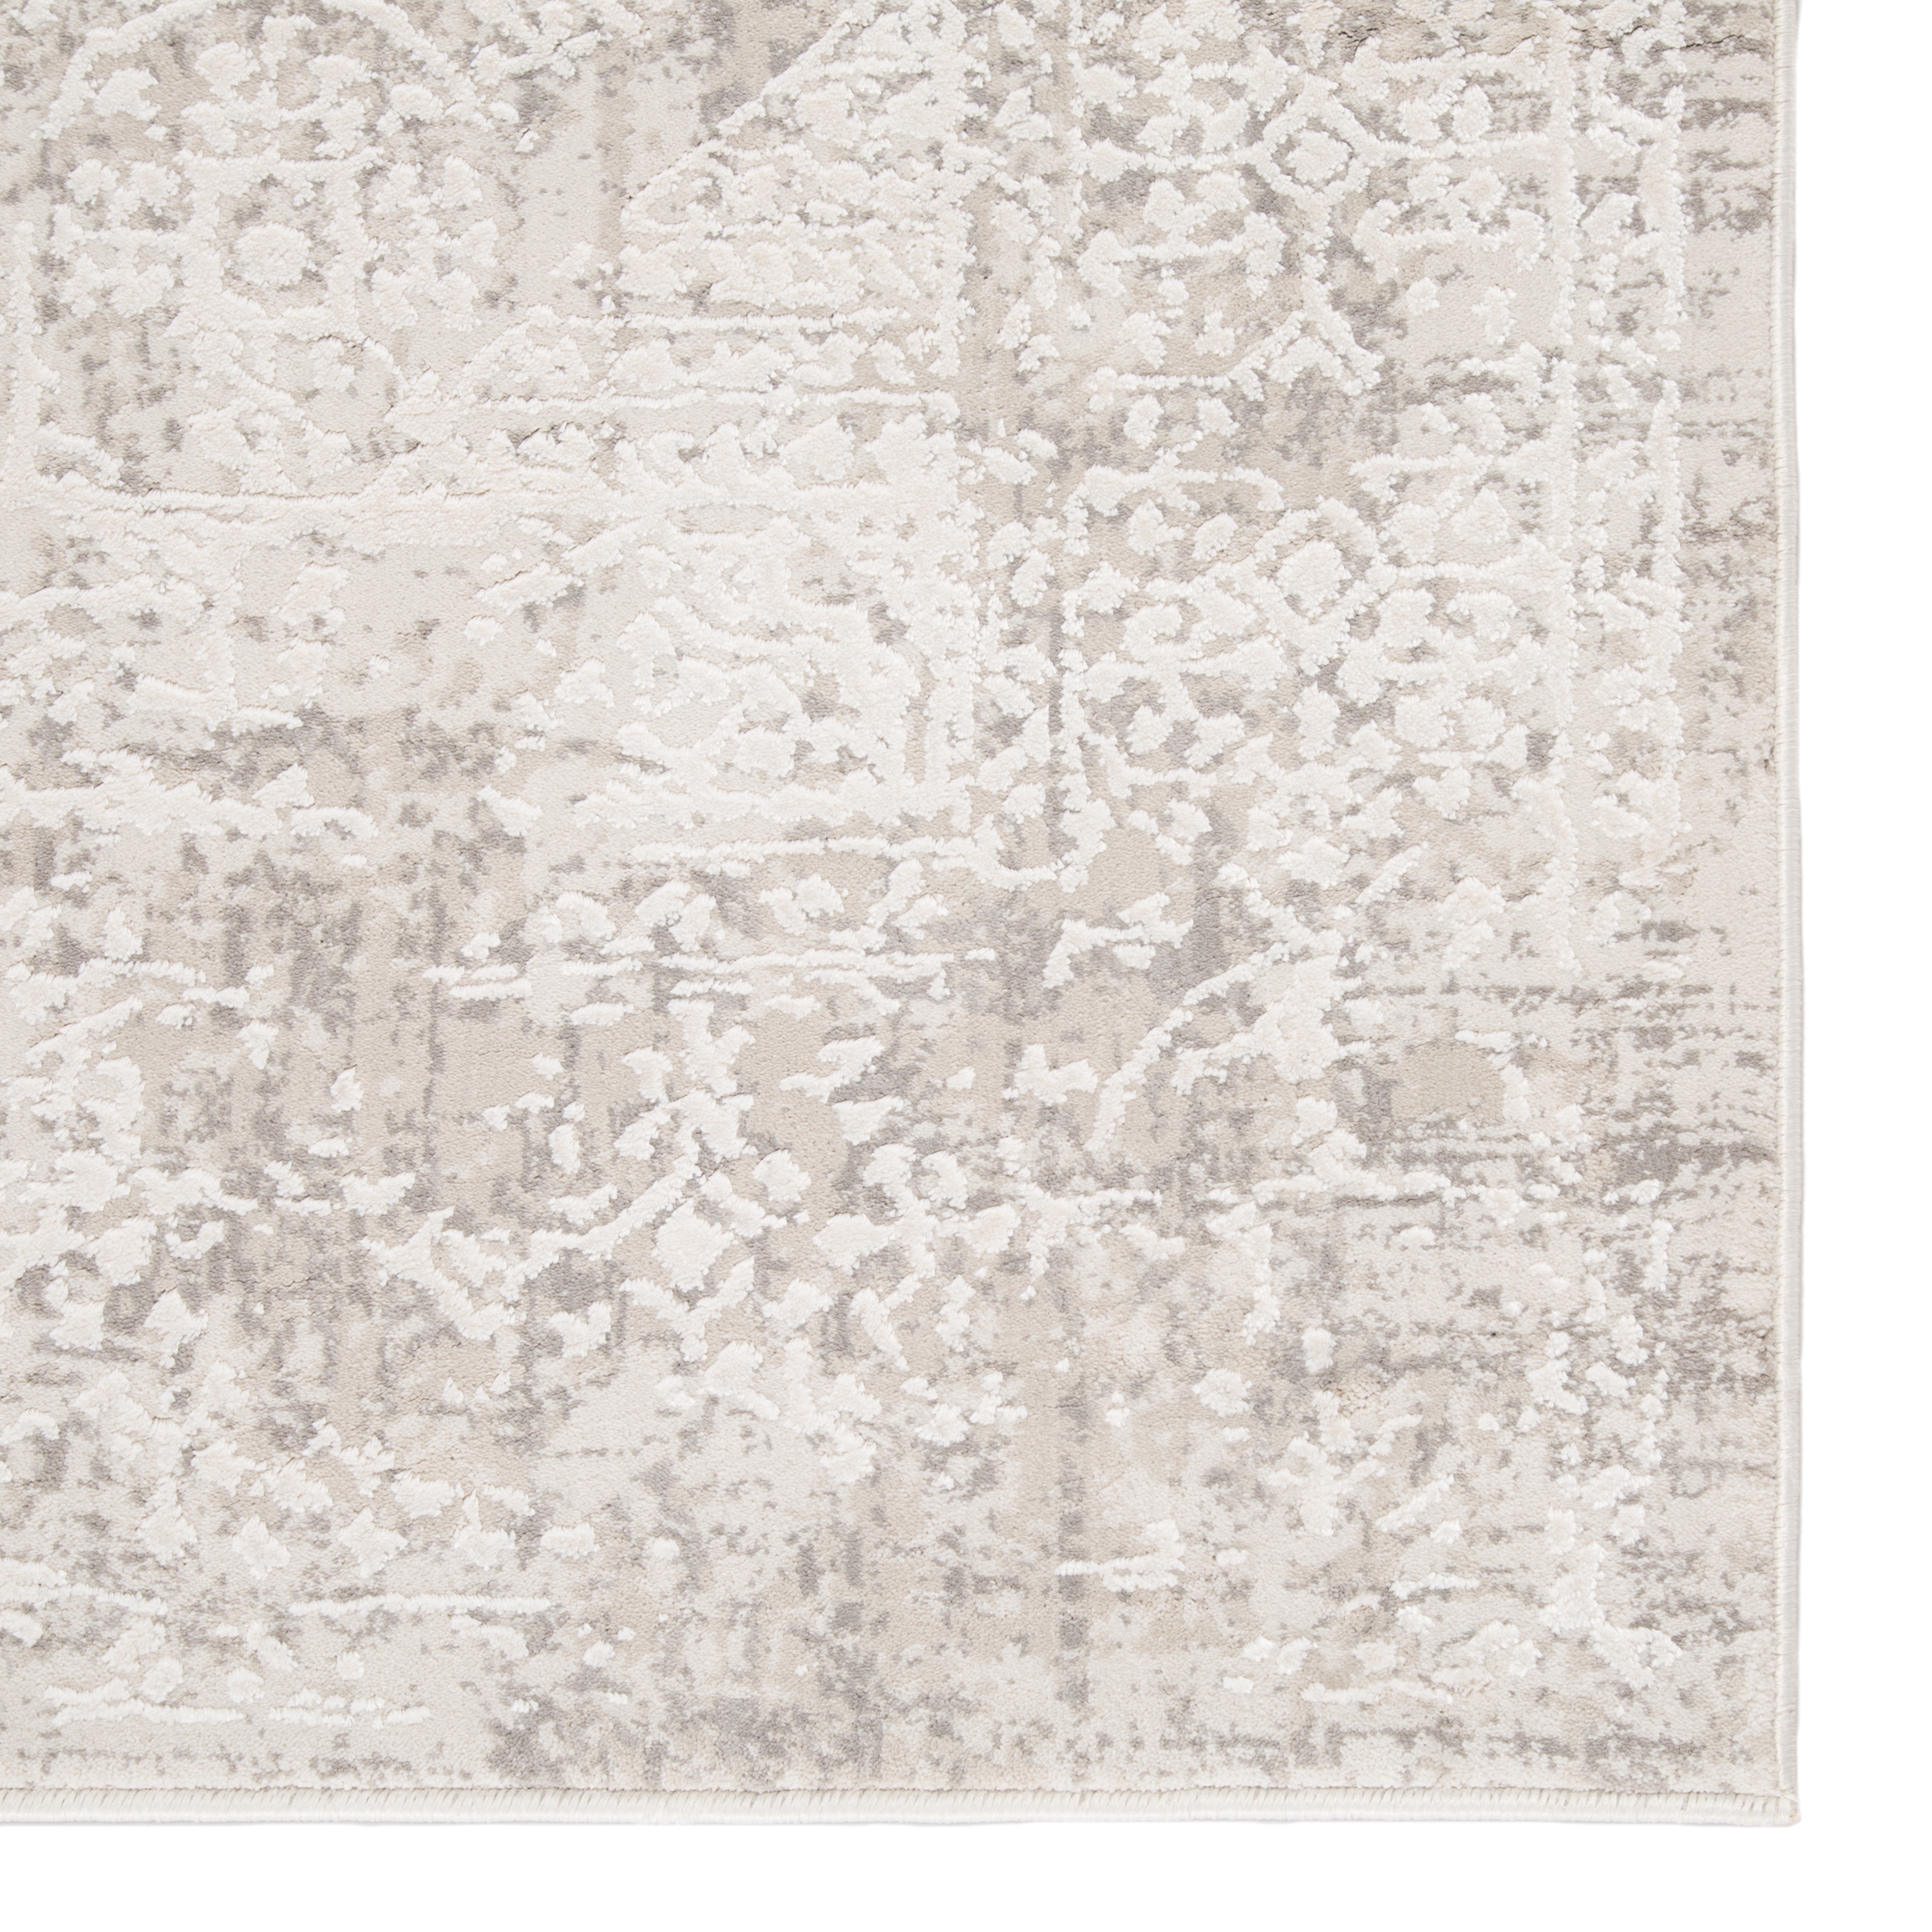 Lianna Abstract Silver/ White Area Rug (5' X 7'6") - Image 3